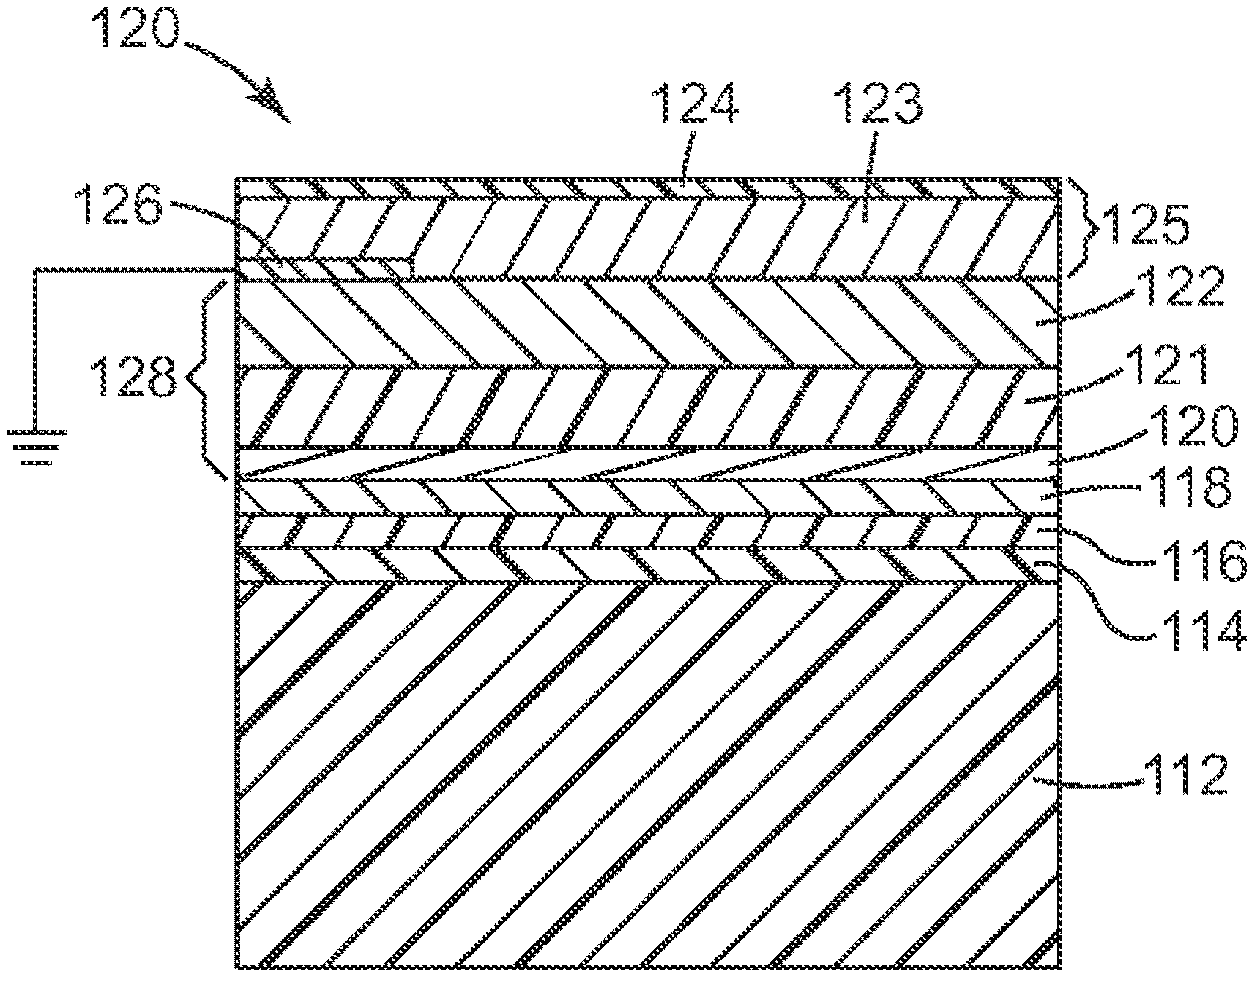 Process for forming optically clear conductive metal or metal alloy thin films and films made therefrom